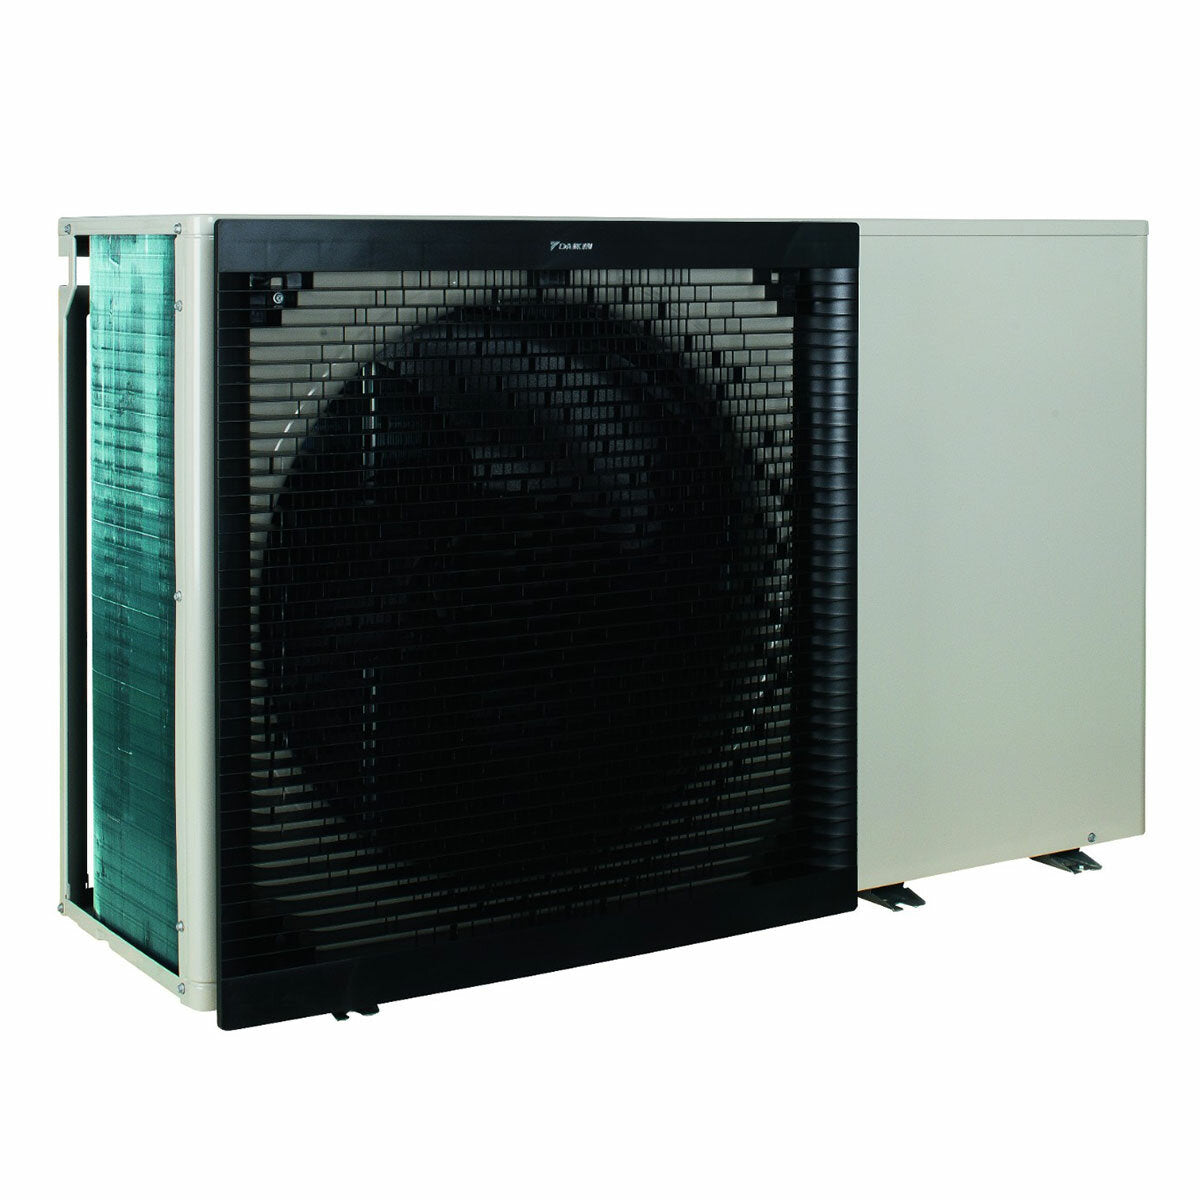 Daikin air/water heat pump 12 kW single-phase power supply with R32 A++ gas hydronic module